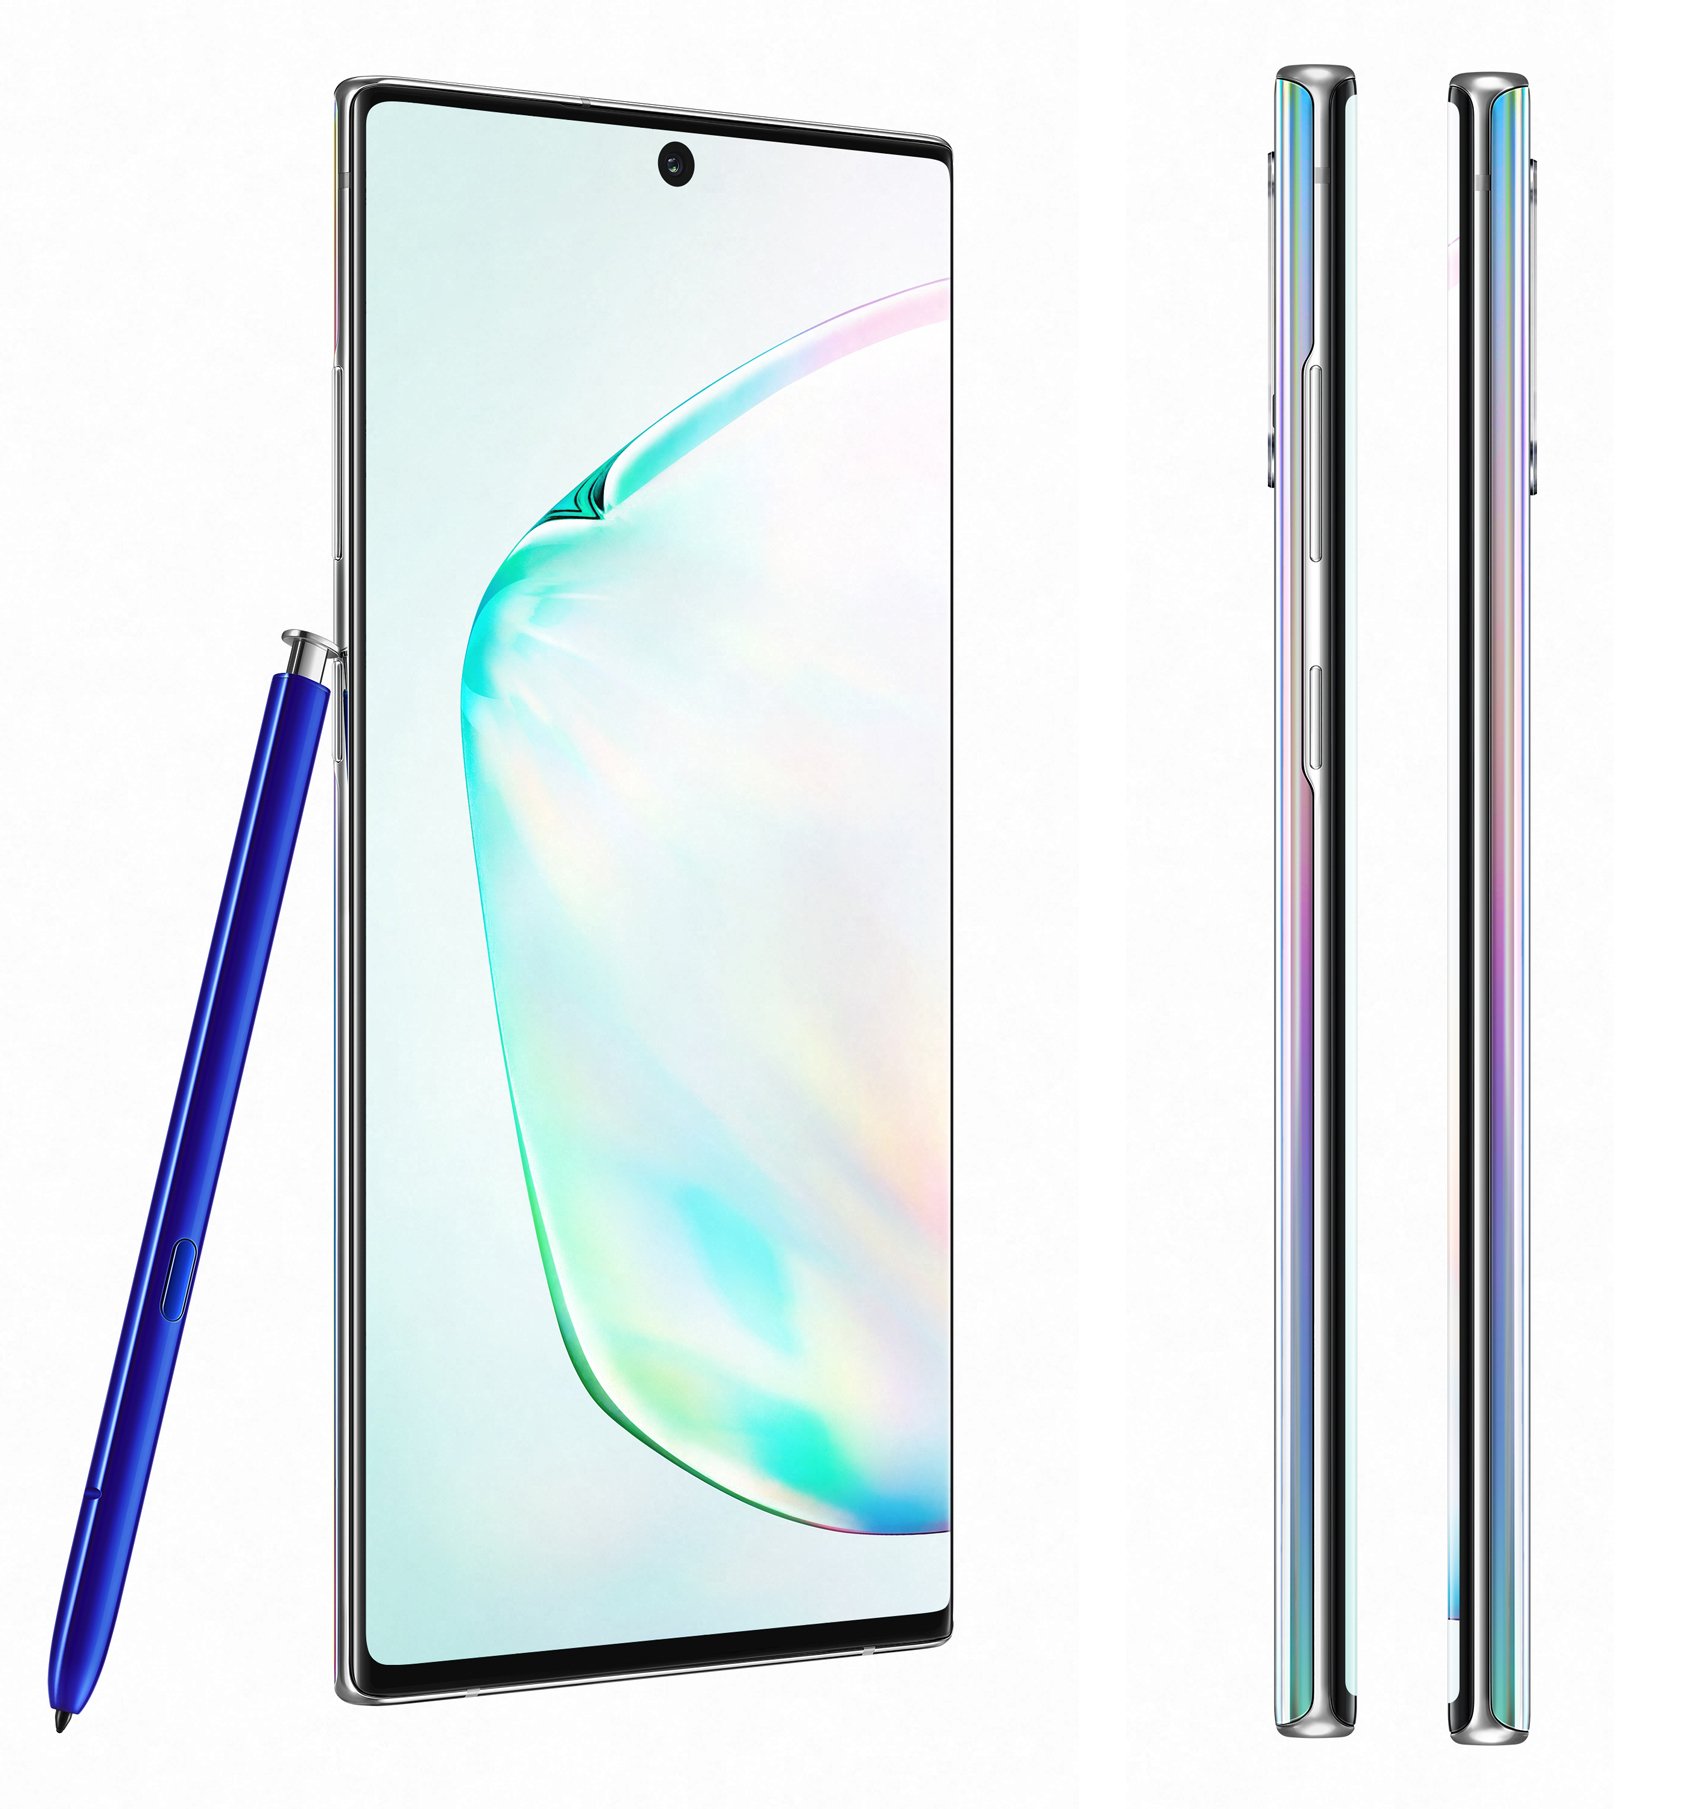 Samsung Galaxy Note 10+ 5G specs, review, release date PhonesData